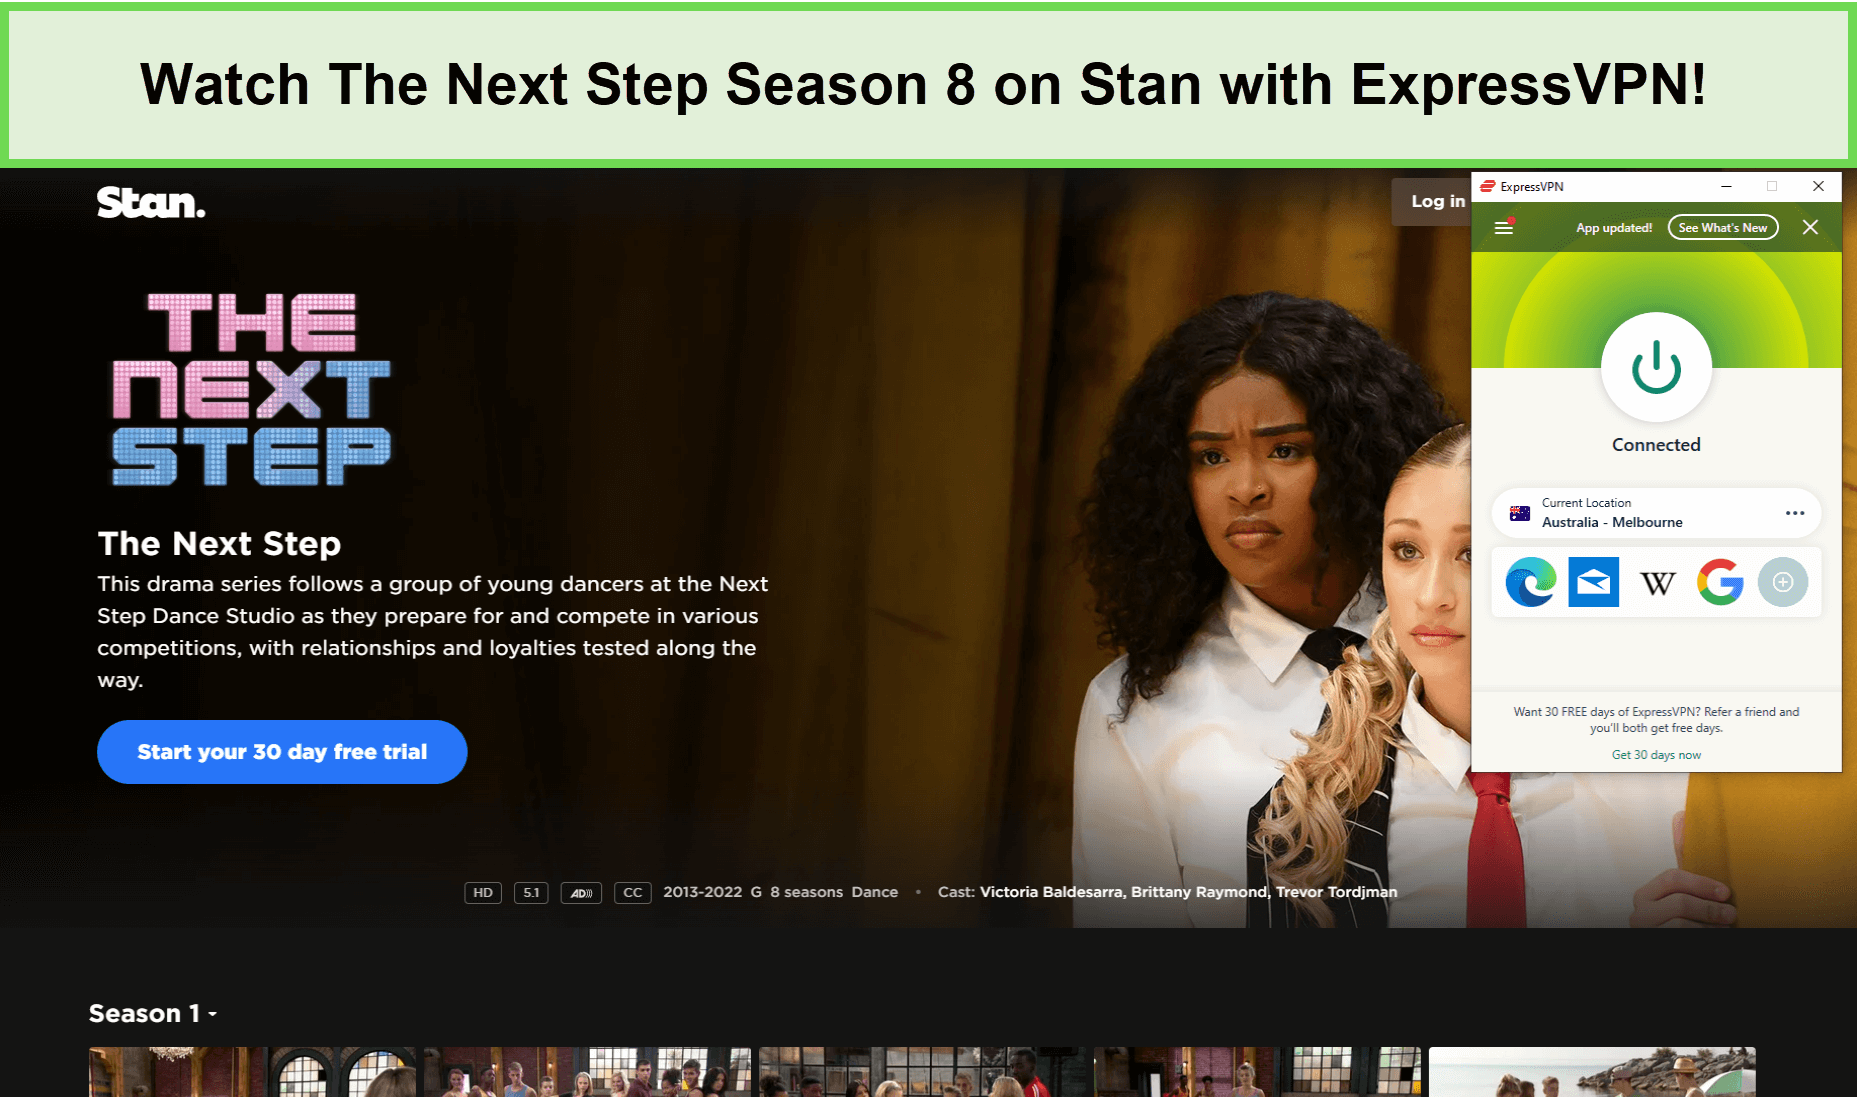 Watch-The-Next-Step-Season-8-in-UK-on-Stan-with-ExpressVPN